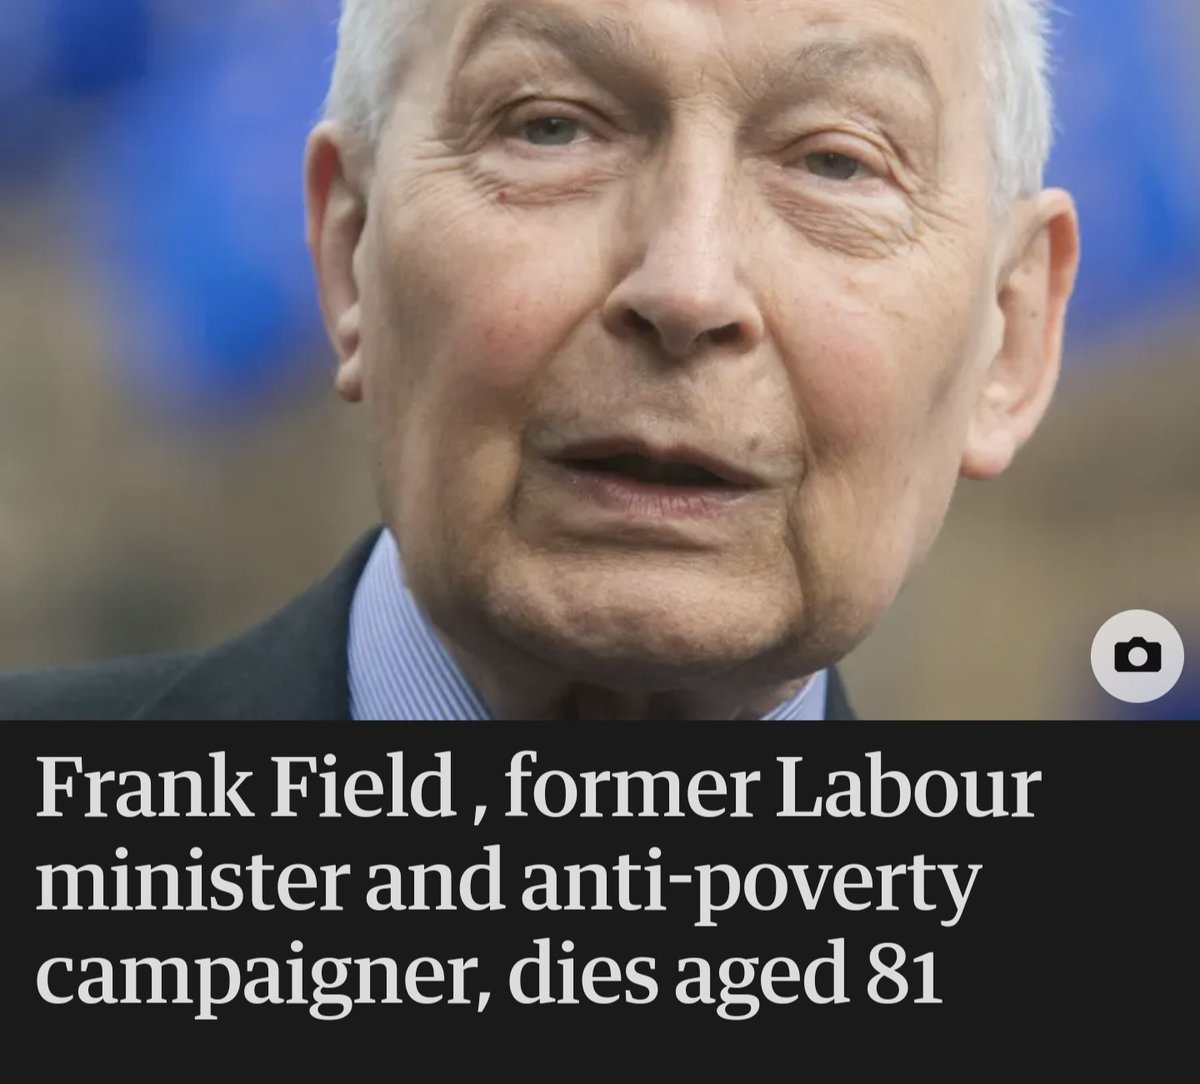 Oh no. One of the few great MPs of the last thirty years. A warm man who cared deeply for his constituents and the working people of Britain. He got it. Rest in peace.